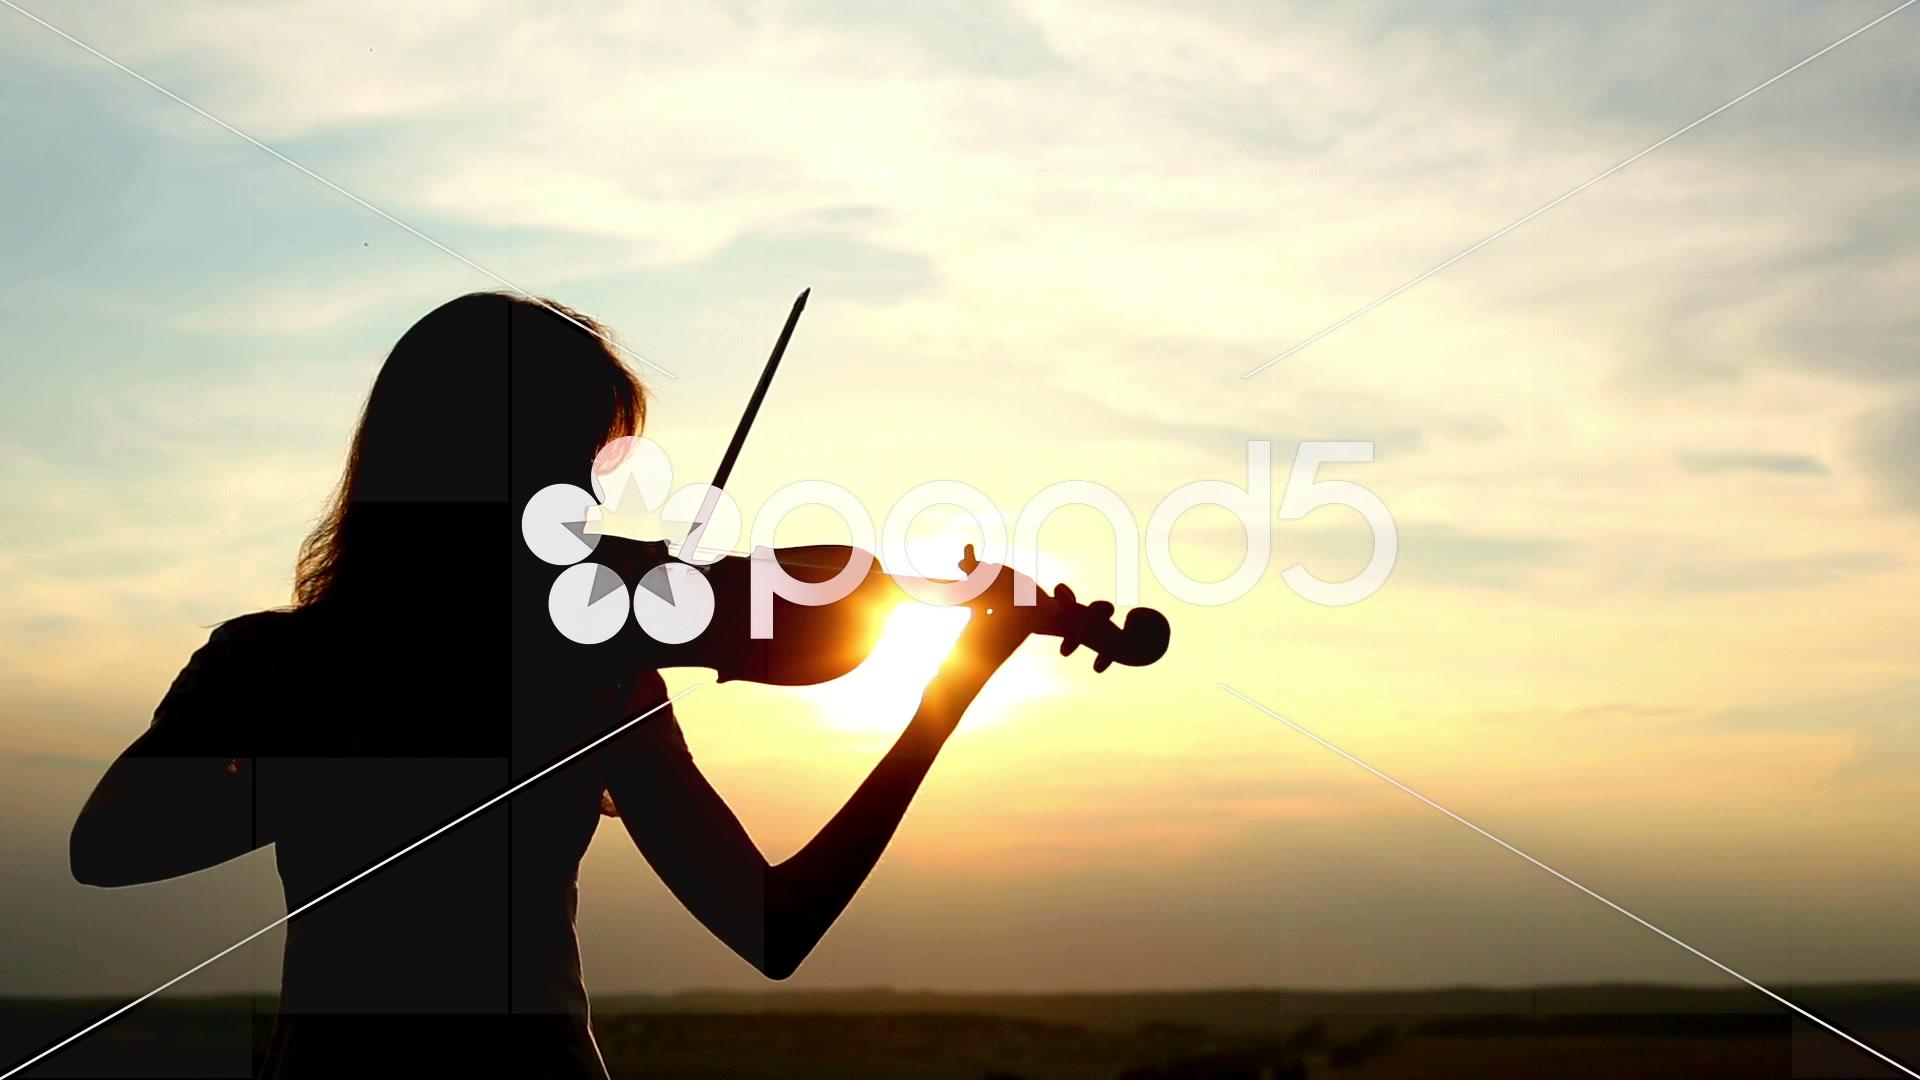 Video: Silhouette girl violinist playing the violin at sunset sky